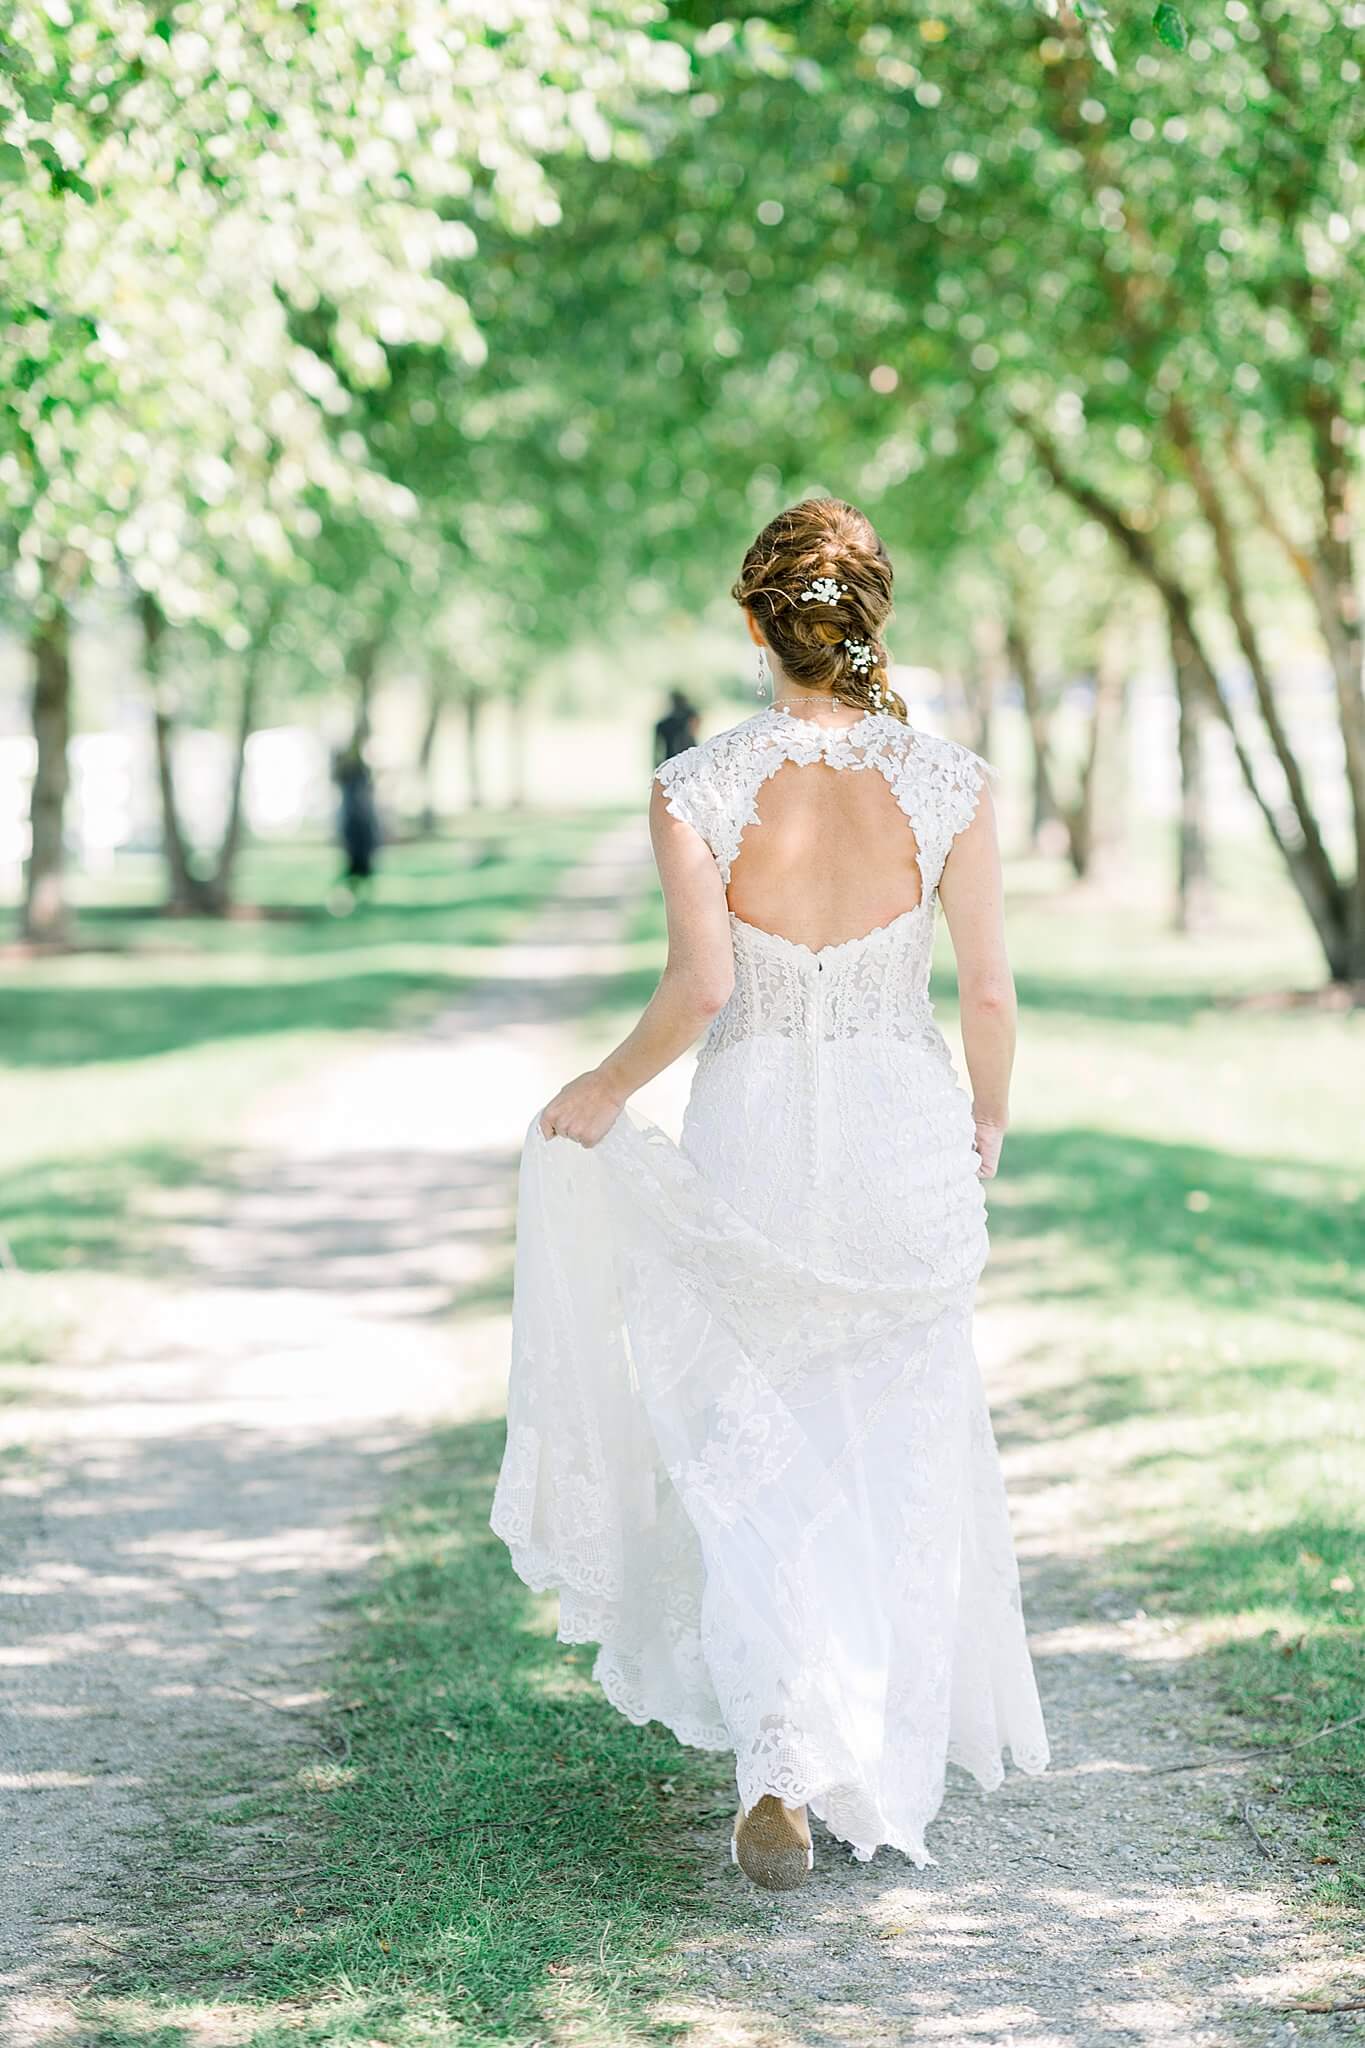 Bride walks down lane of trees for first look with groom at Crooked Creek Ranch wedding.